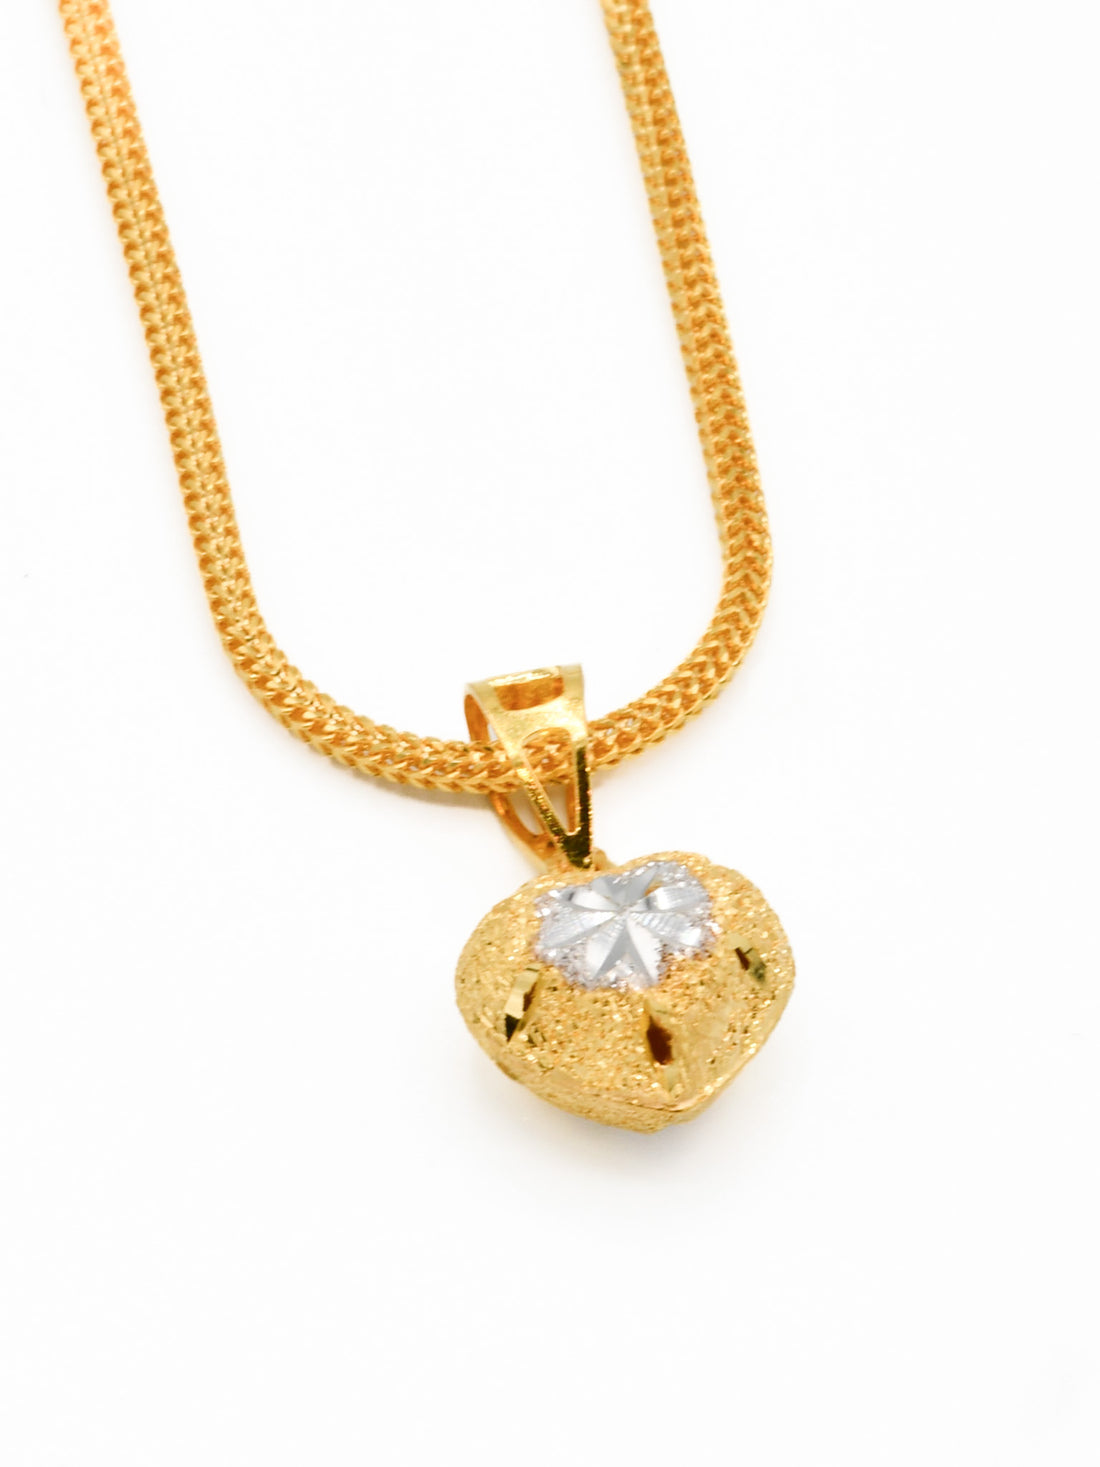 22ct Gold Two Tone Heart Pendant - Roop Darshan